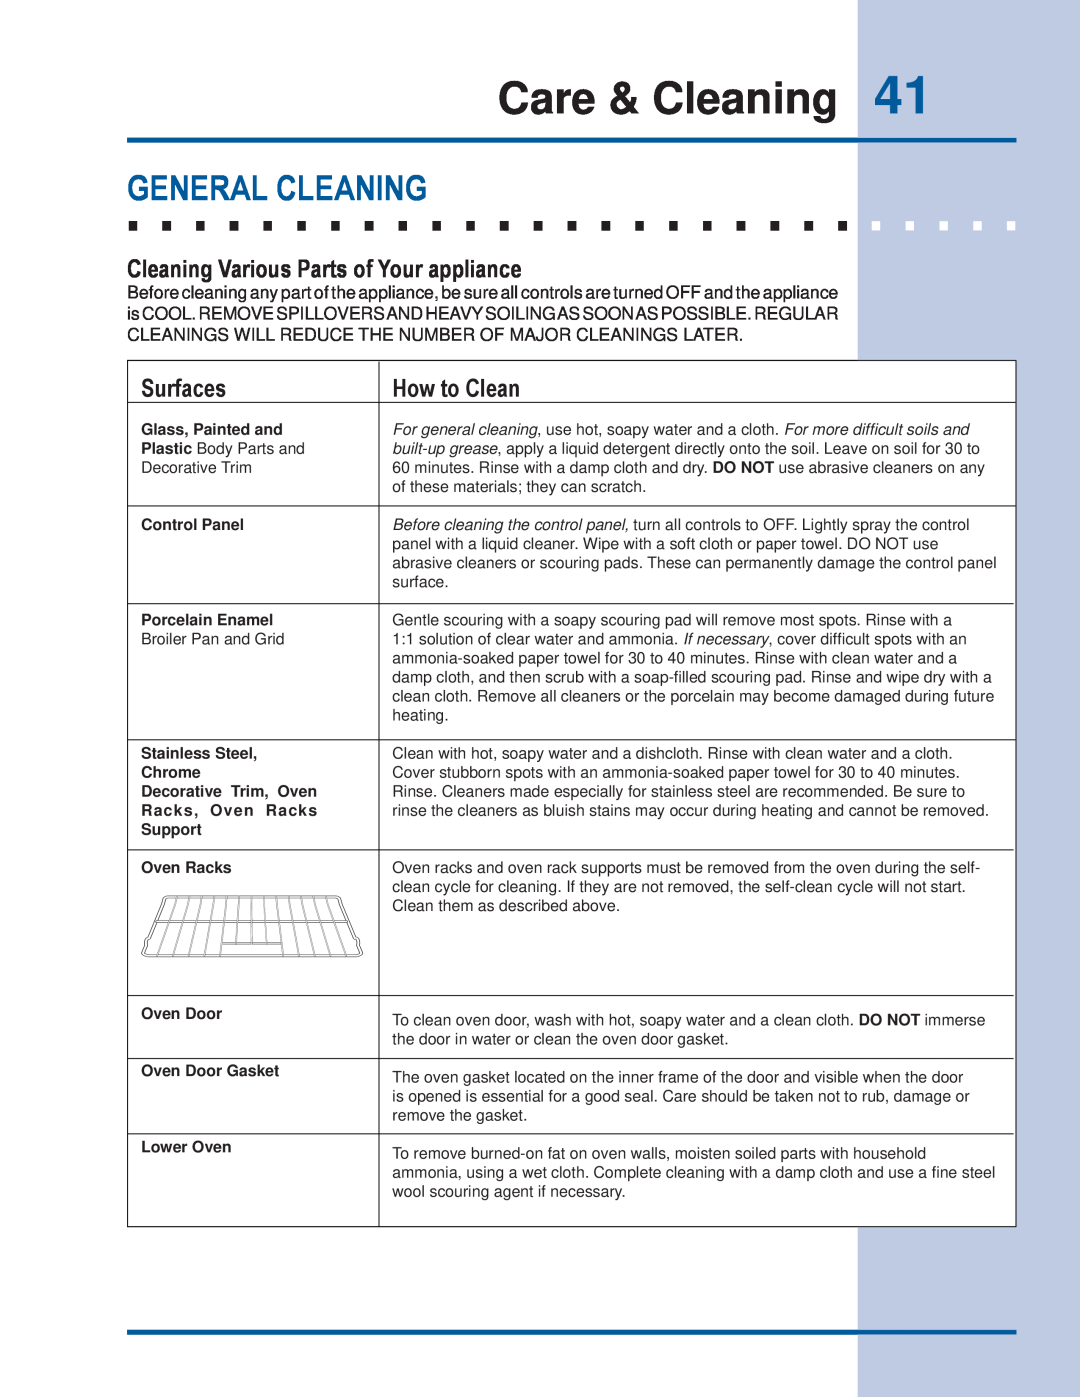 Electrolux EI30ES55JS General Cleaning, Cleaning Various Parts of Your appliance, Care & Cleaning, Surfaces, How to Clean 